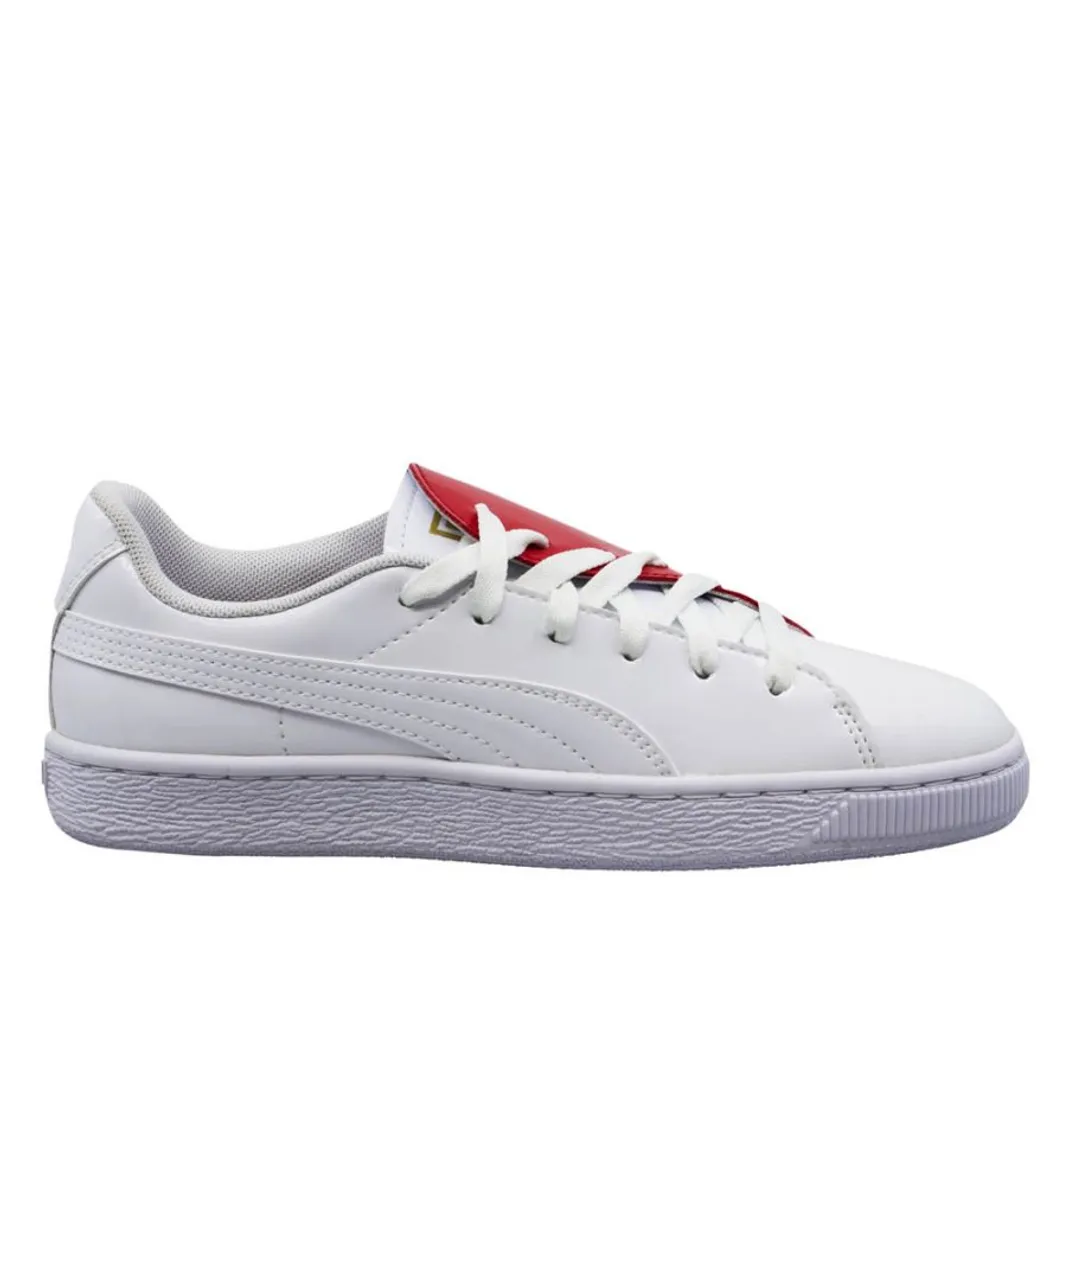 Puma Basket Crush Womens Trainers Low White Casual Lace Up Shoes 369556 01